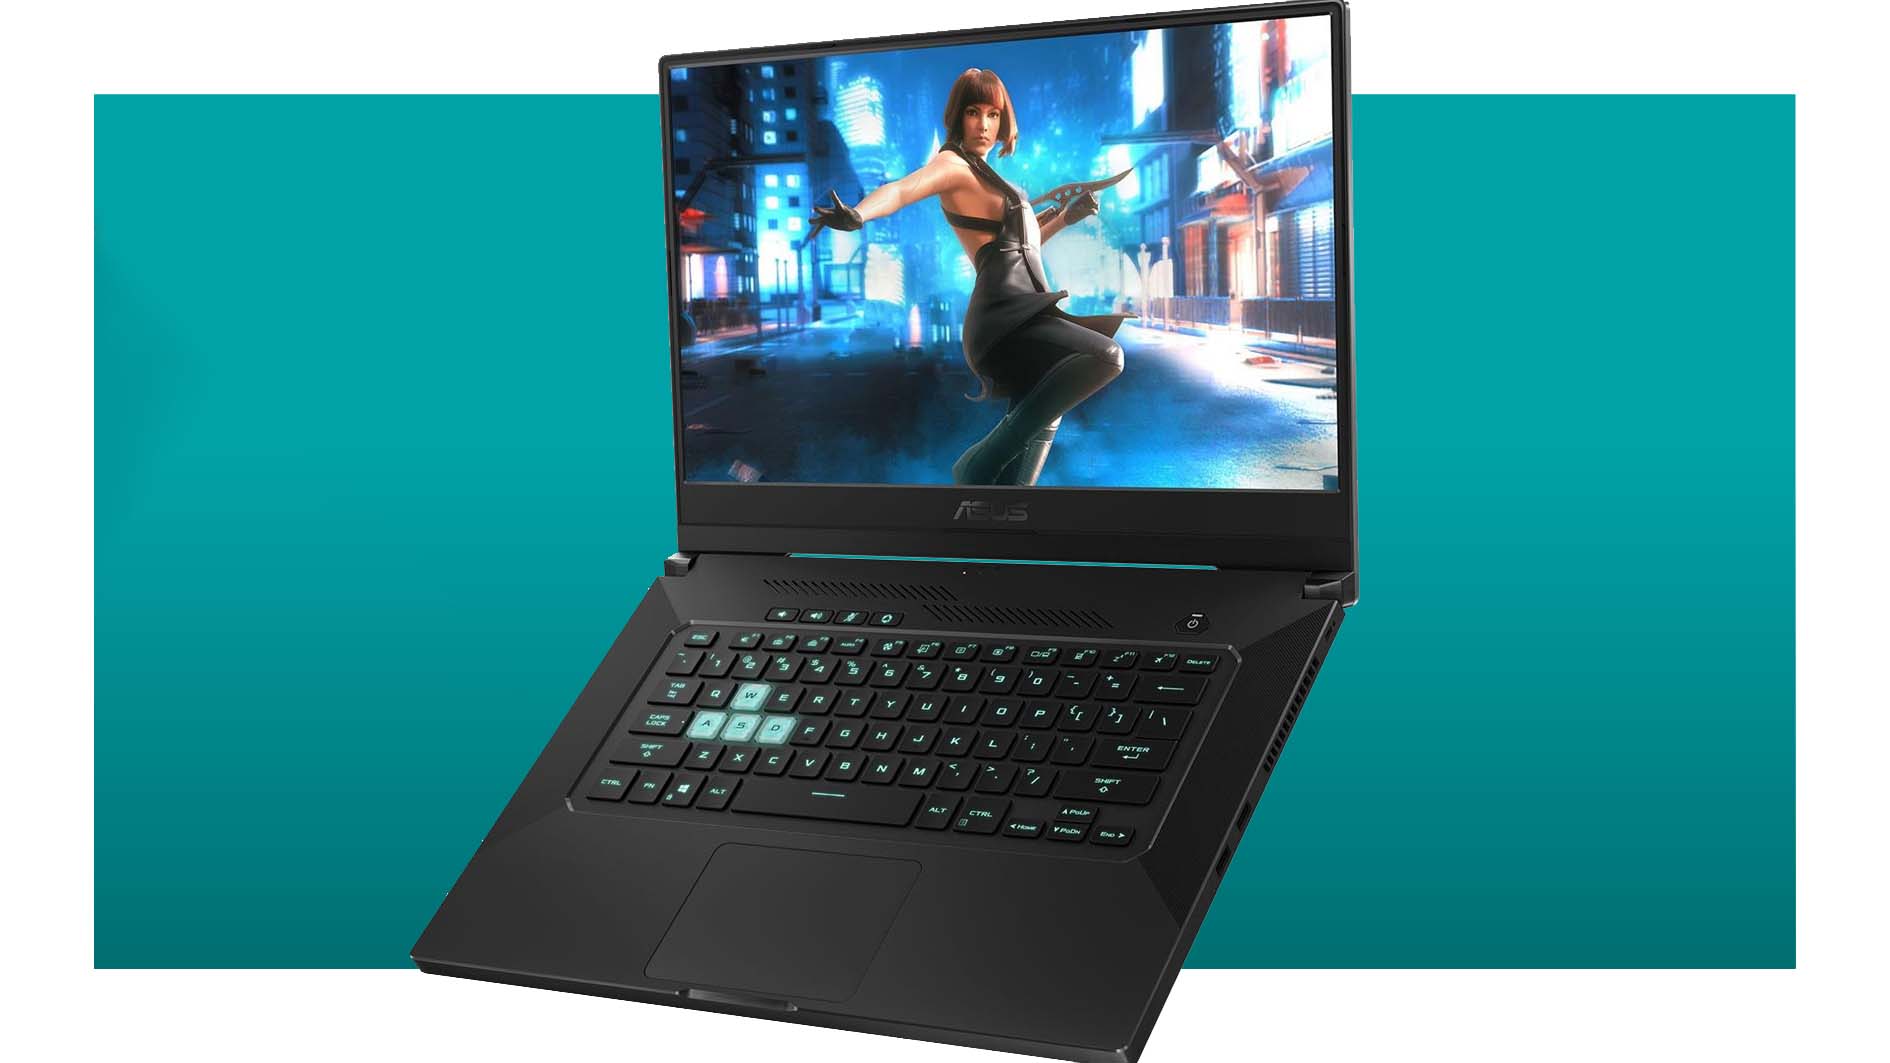  This Asus TUF gaming laptop with an RTX 3060 is surprisingly only £800 